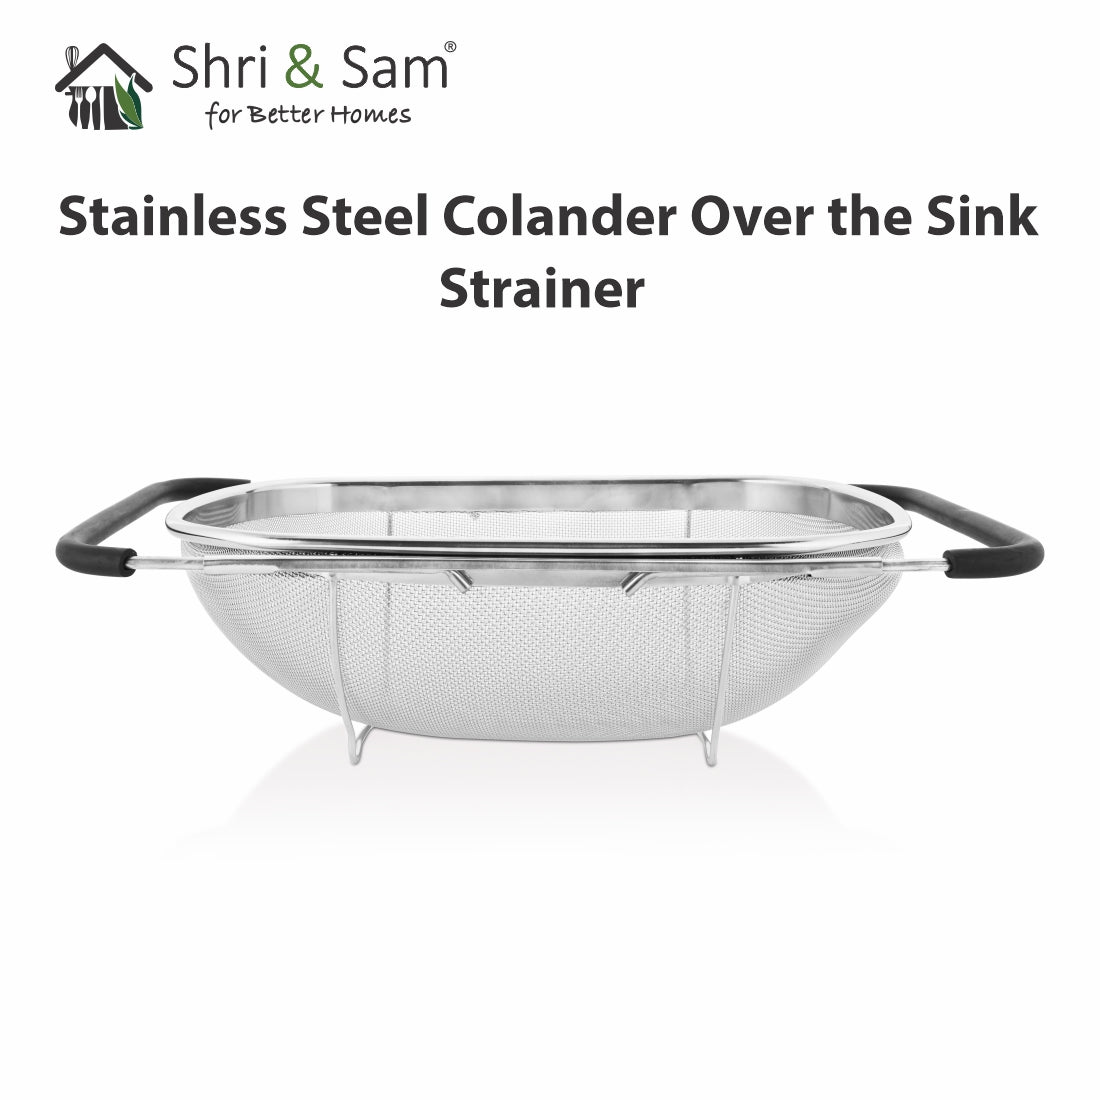 Stainless Steel Colander Over the Sink Strainer